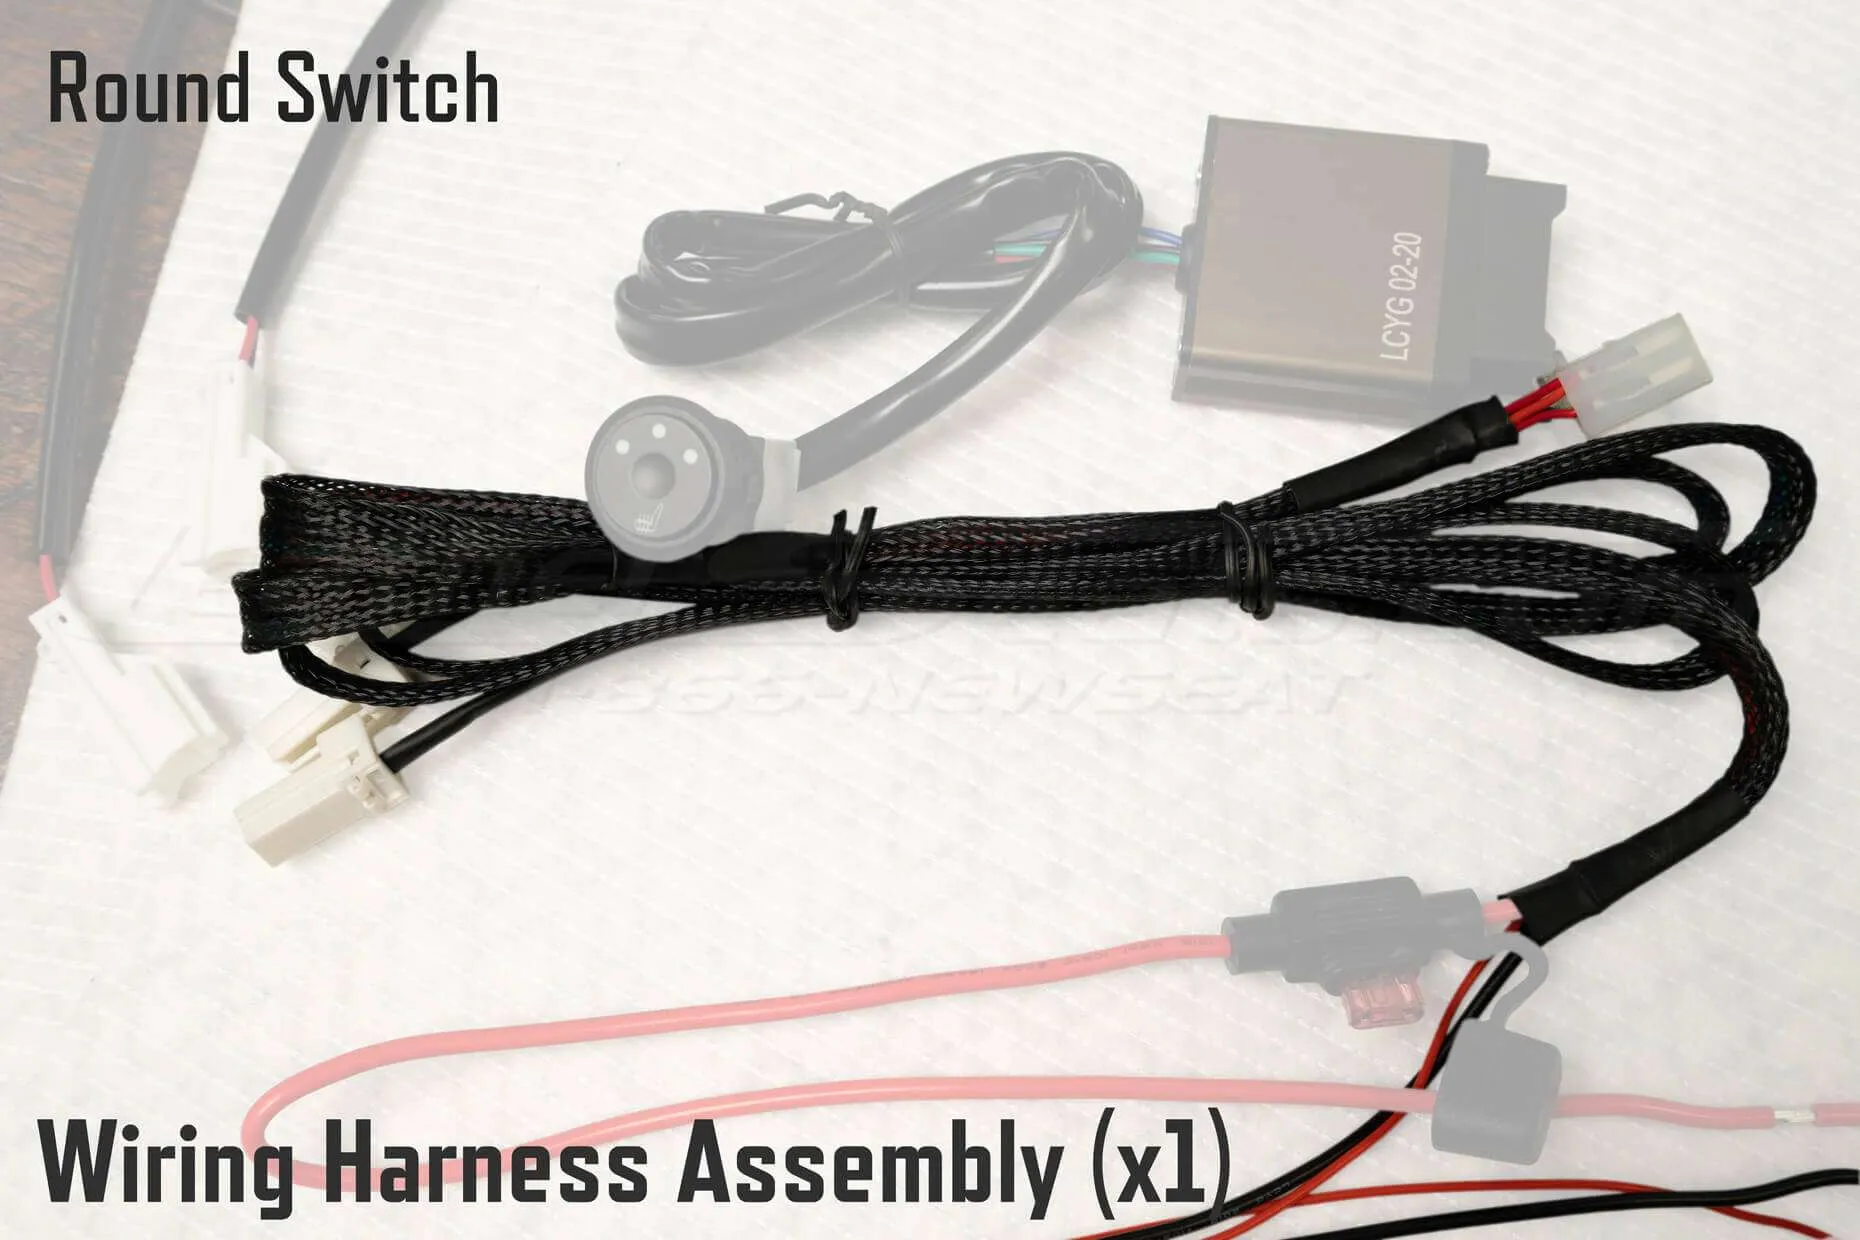 Round Switch Wiring Harness Assembly